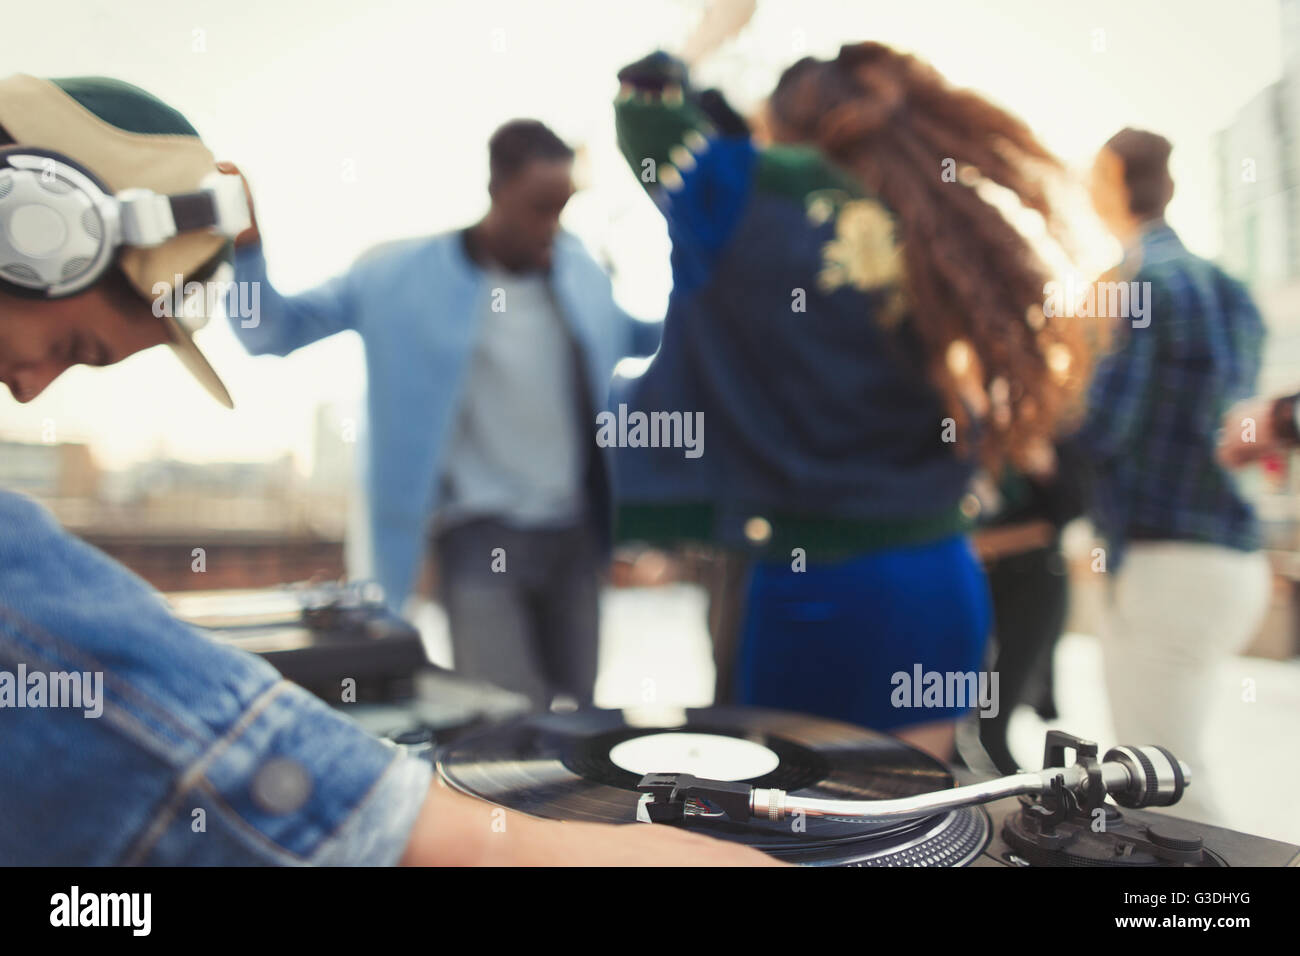 DJ spinning records at rooftop party Stock Photo